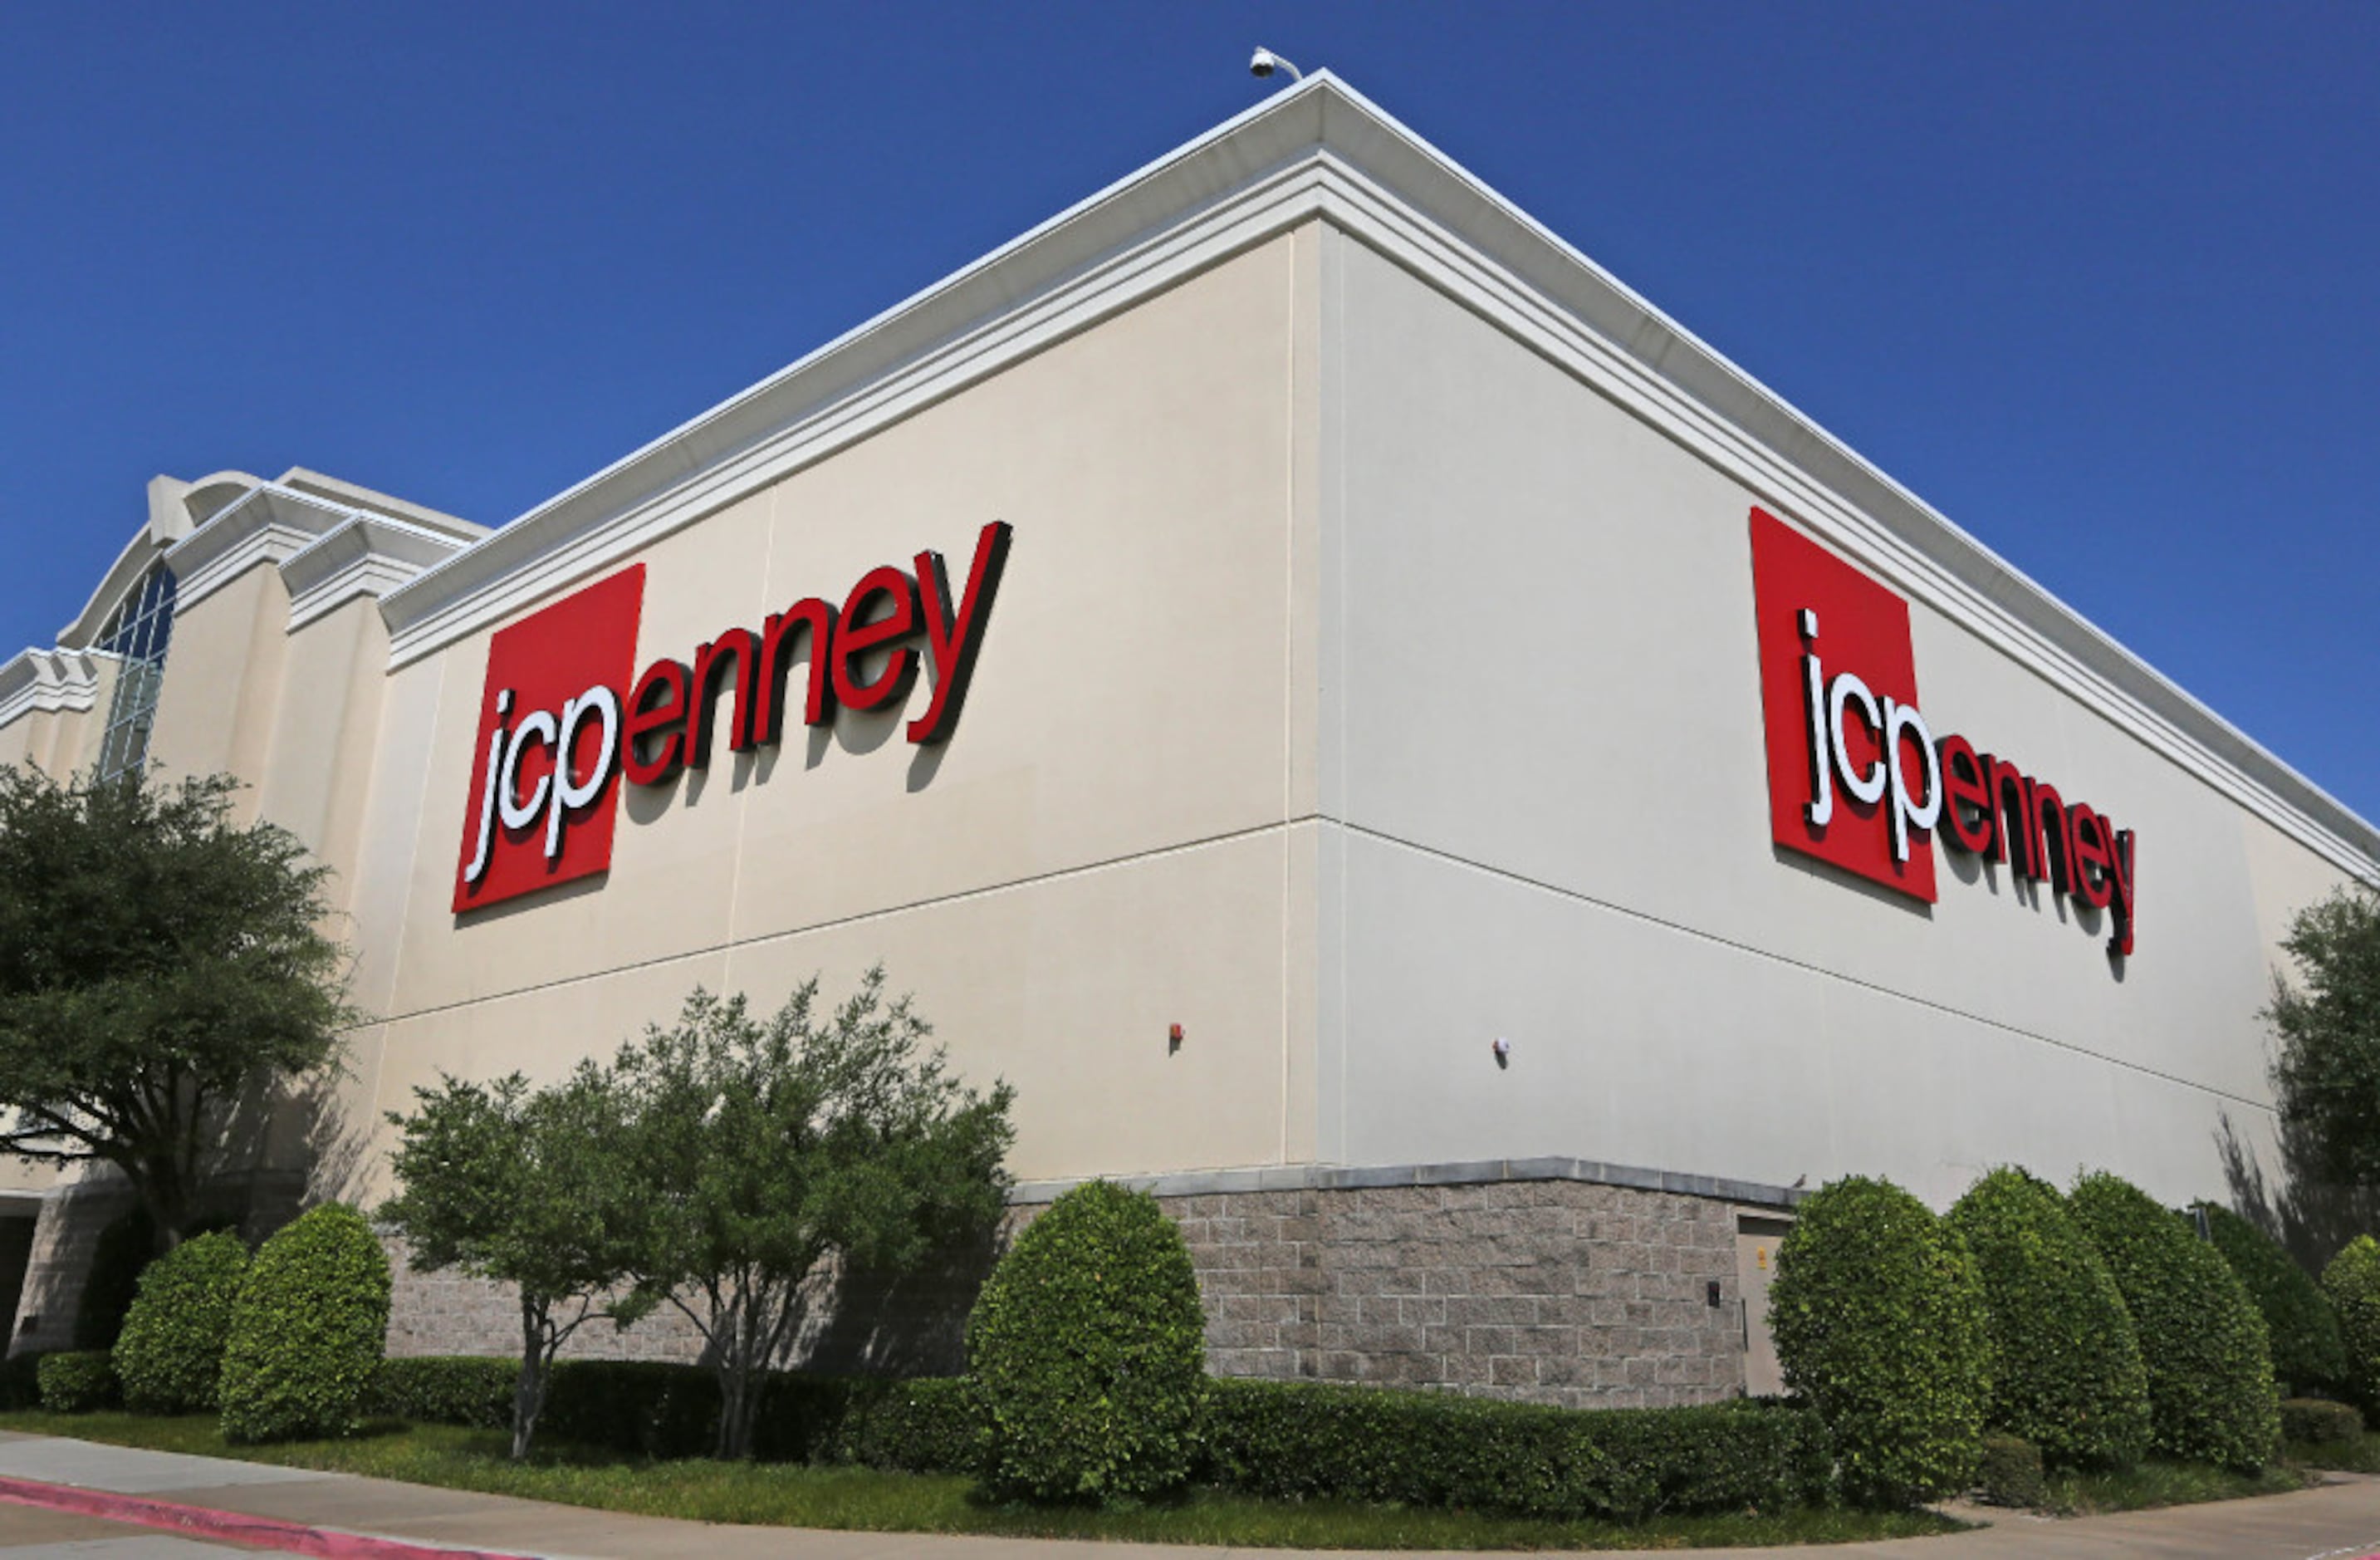 JCPenney CEO says company focused on American working families as economy  weighs on consumers' wallets